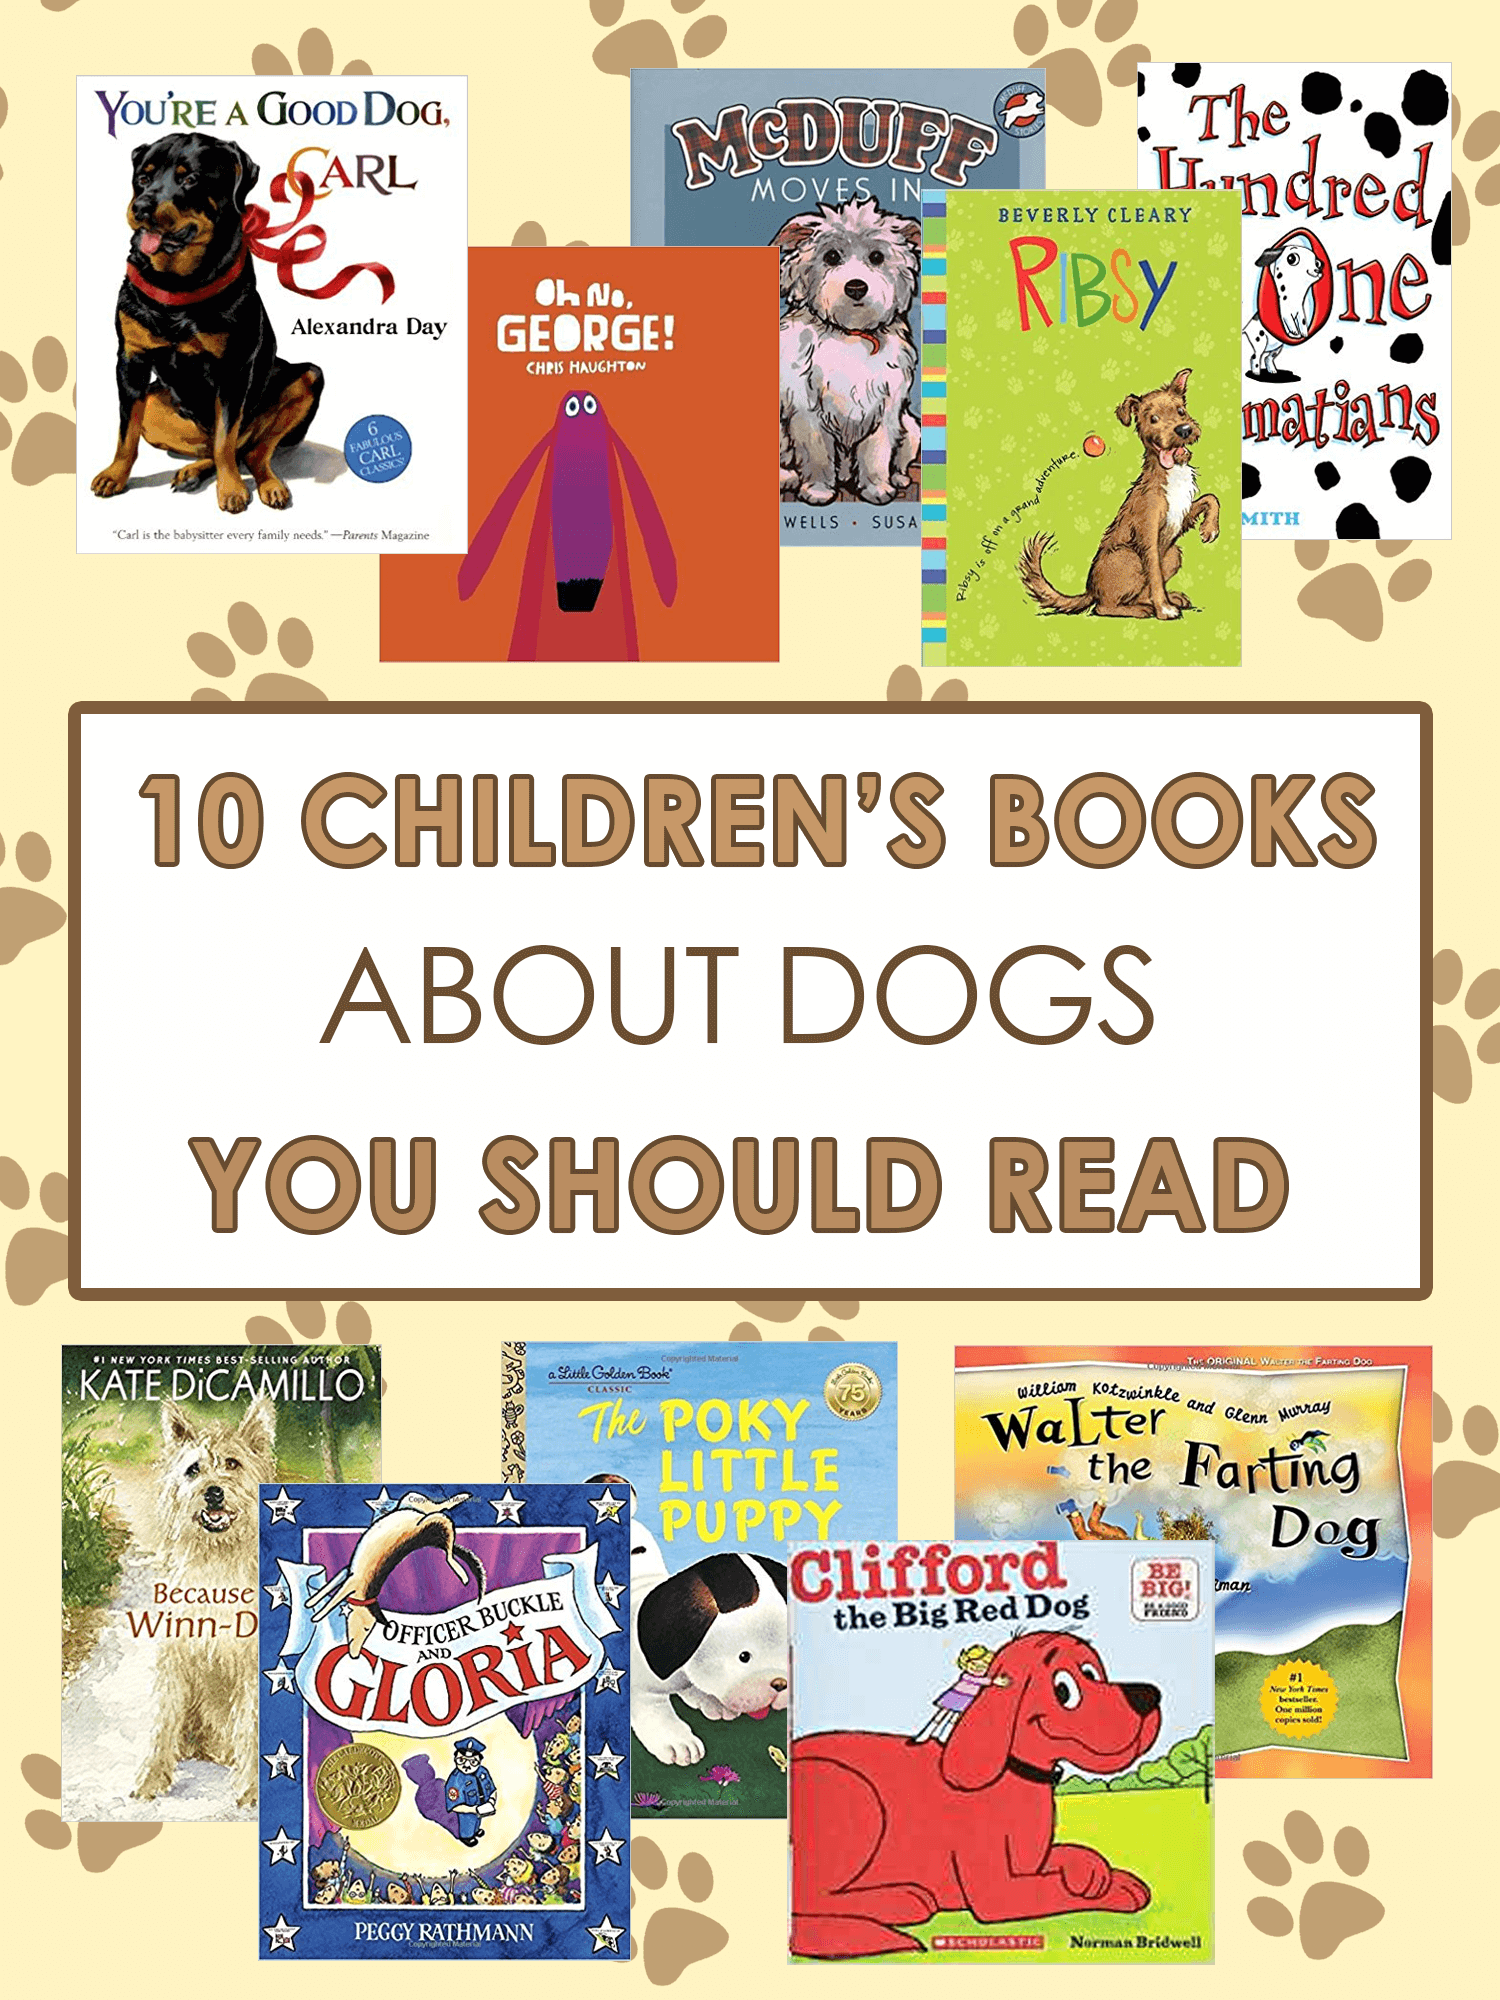 10 Childrens Books about Dogs You Should Read _ imagine forest